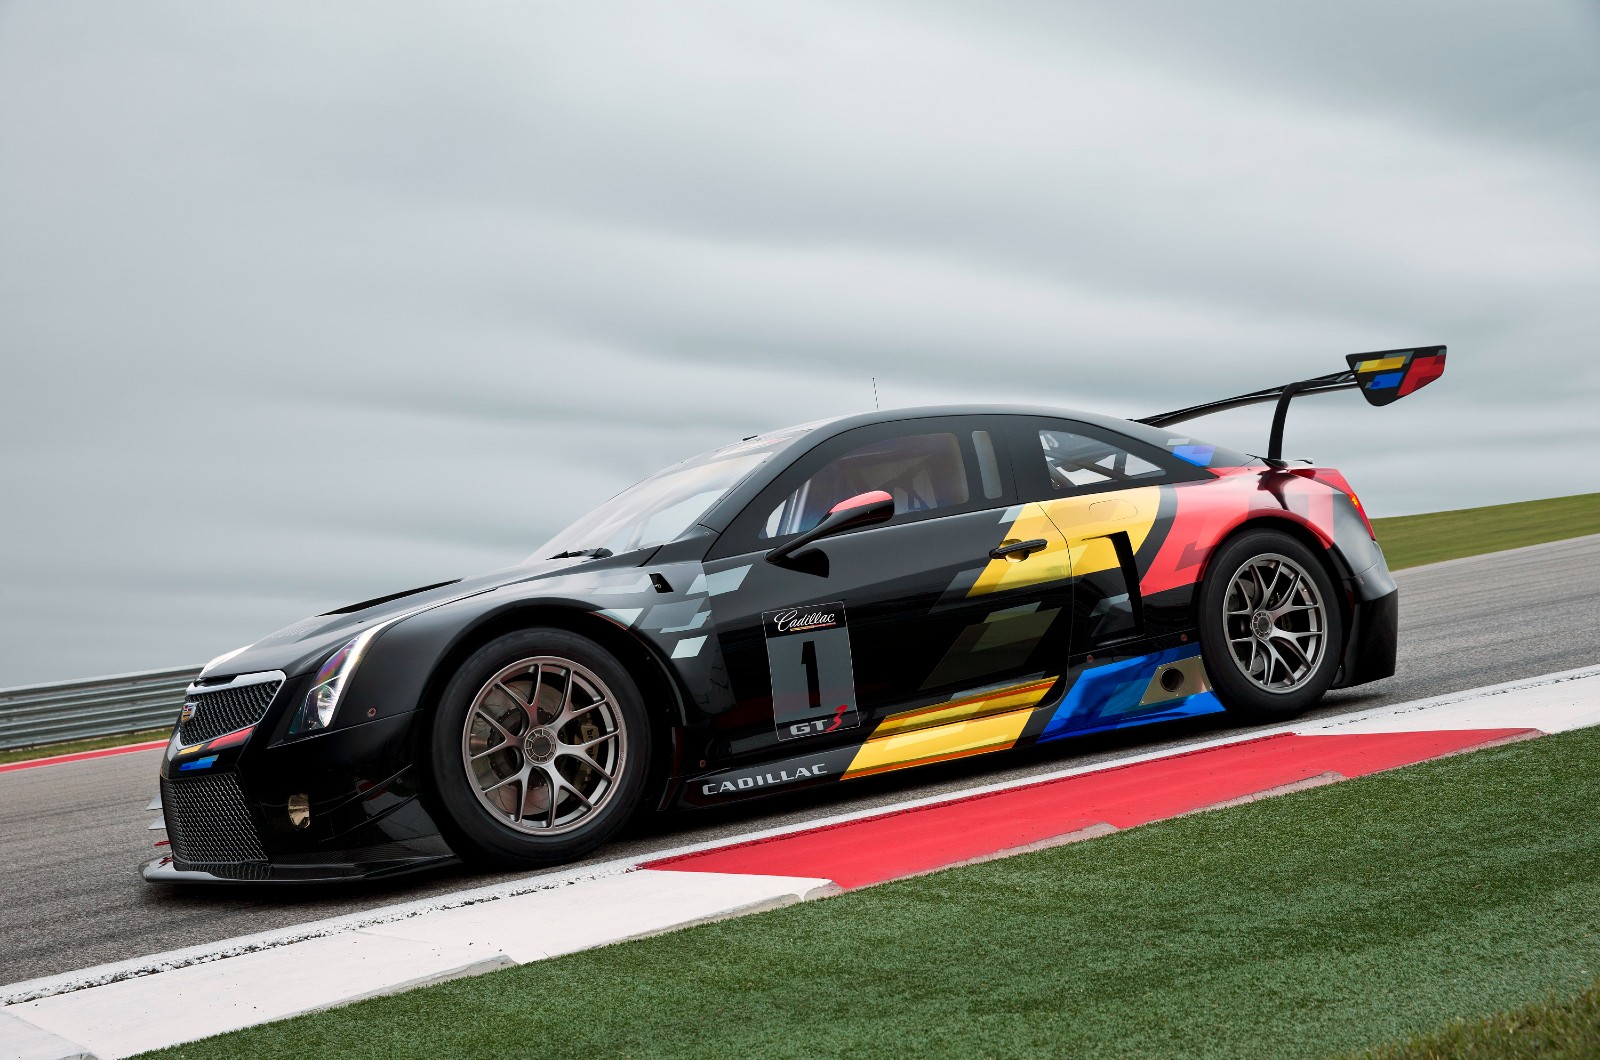 <p>The Cadillac ATS-V.R is a GT3 regulation-compliant race car based on the 2016 Cadillac ATS-V Coupe. Cadillac’s first compact performance model, the ATS-V.R makes use of a twin-turbocharged V6 LF4.R engine.</p><p>The compact racer marked significant achievements with a championship win in 2015, and strong finishes in the following years. The Cadillac ATS-V.R will be remembered for its successful run in the Pirelli World Challenge, and proves that American cars are not done winning international races.</p>